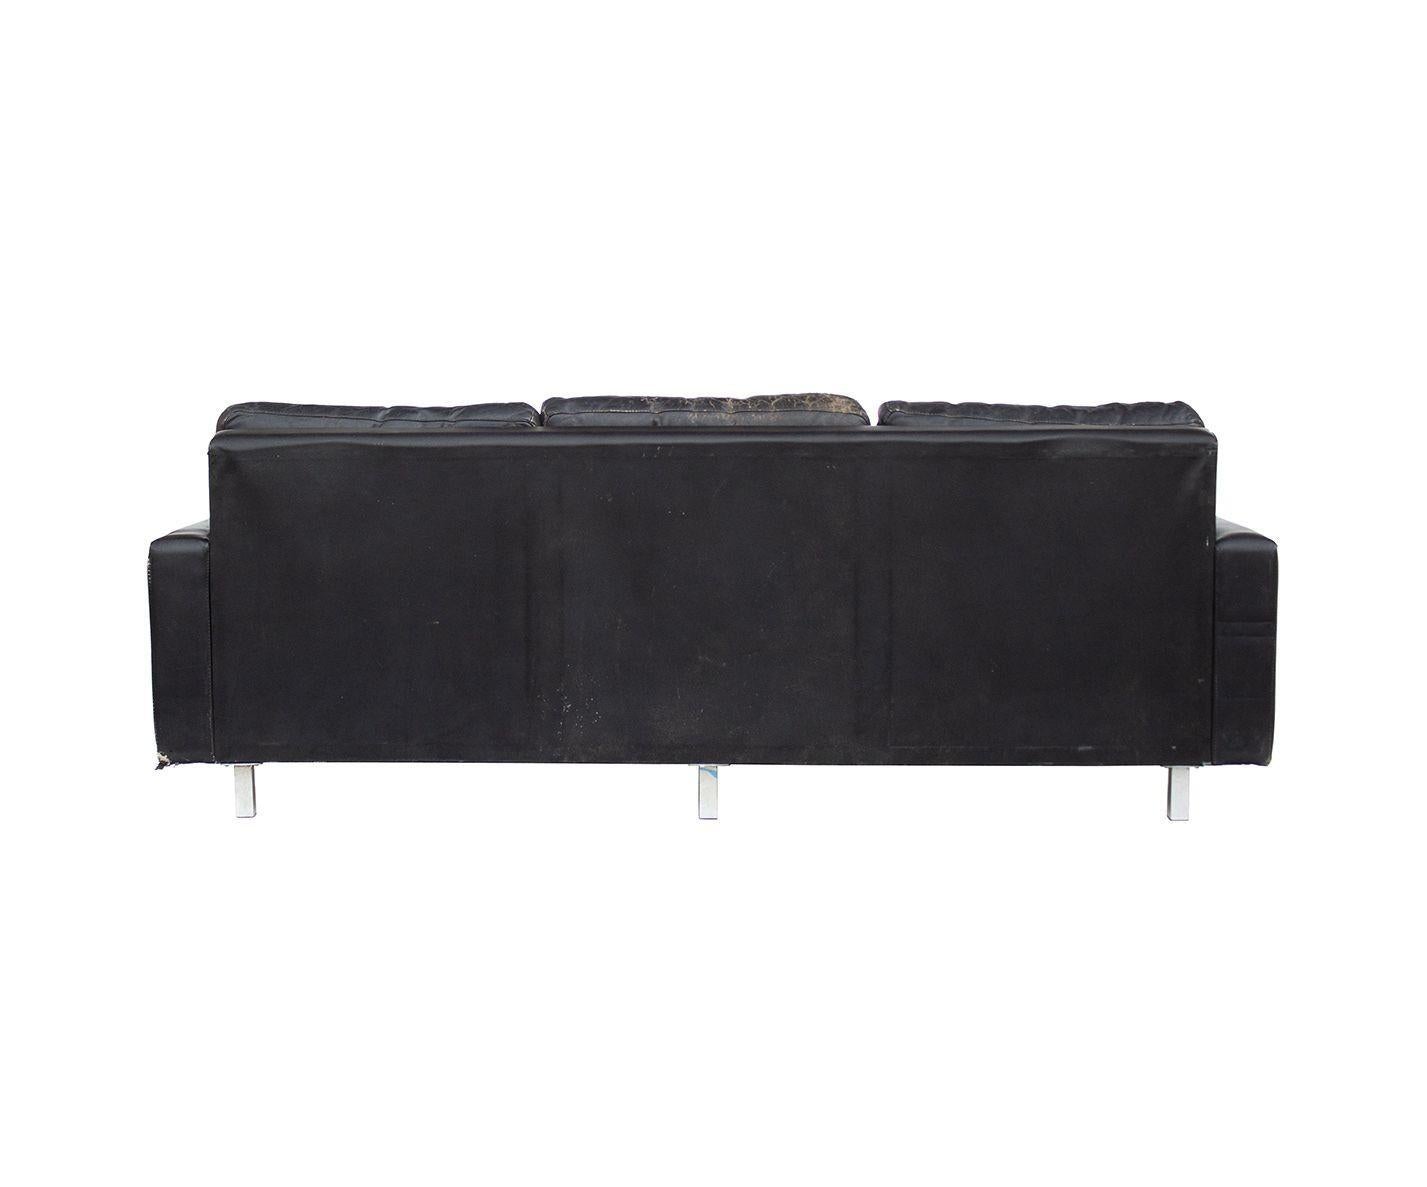 Mid-Century Modern Tufted Black Leather Sofa, Imported from Europe in the '60s For Sale